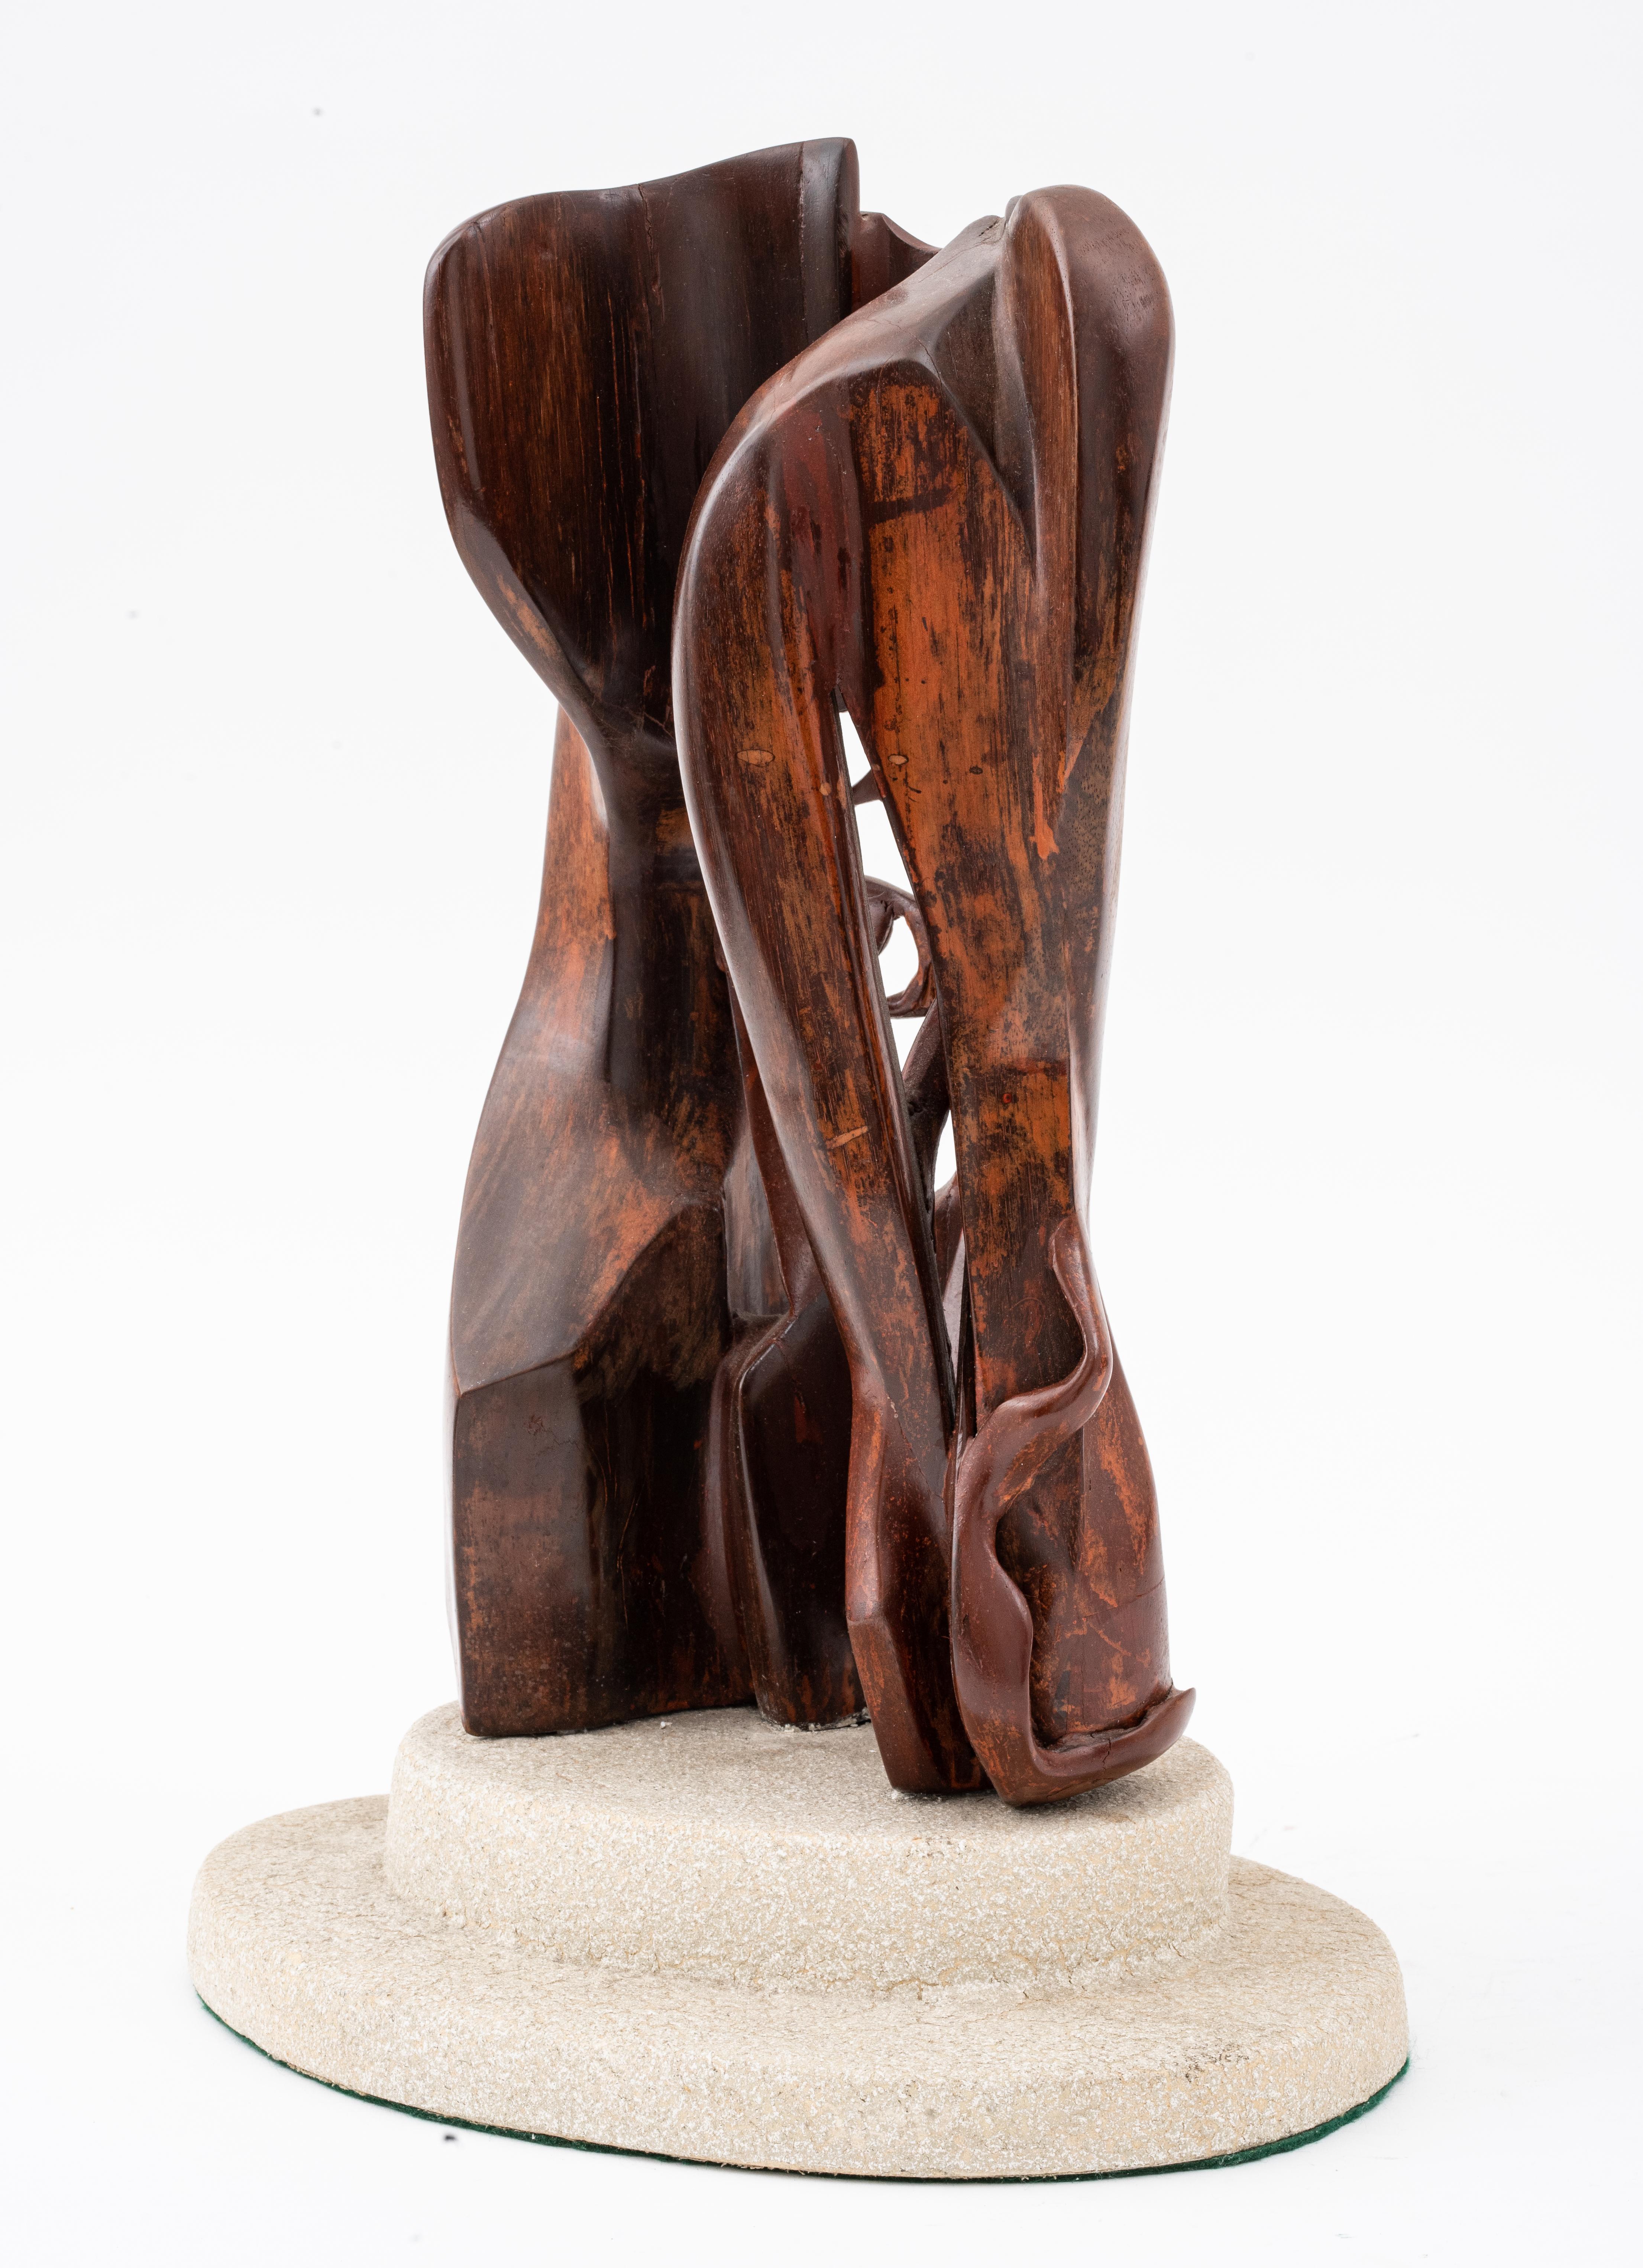 Modern wood carved sculpture depicting face in abstract shapes, no visible signature, mounted upon an oval stone base. With base: 17.25